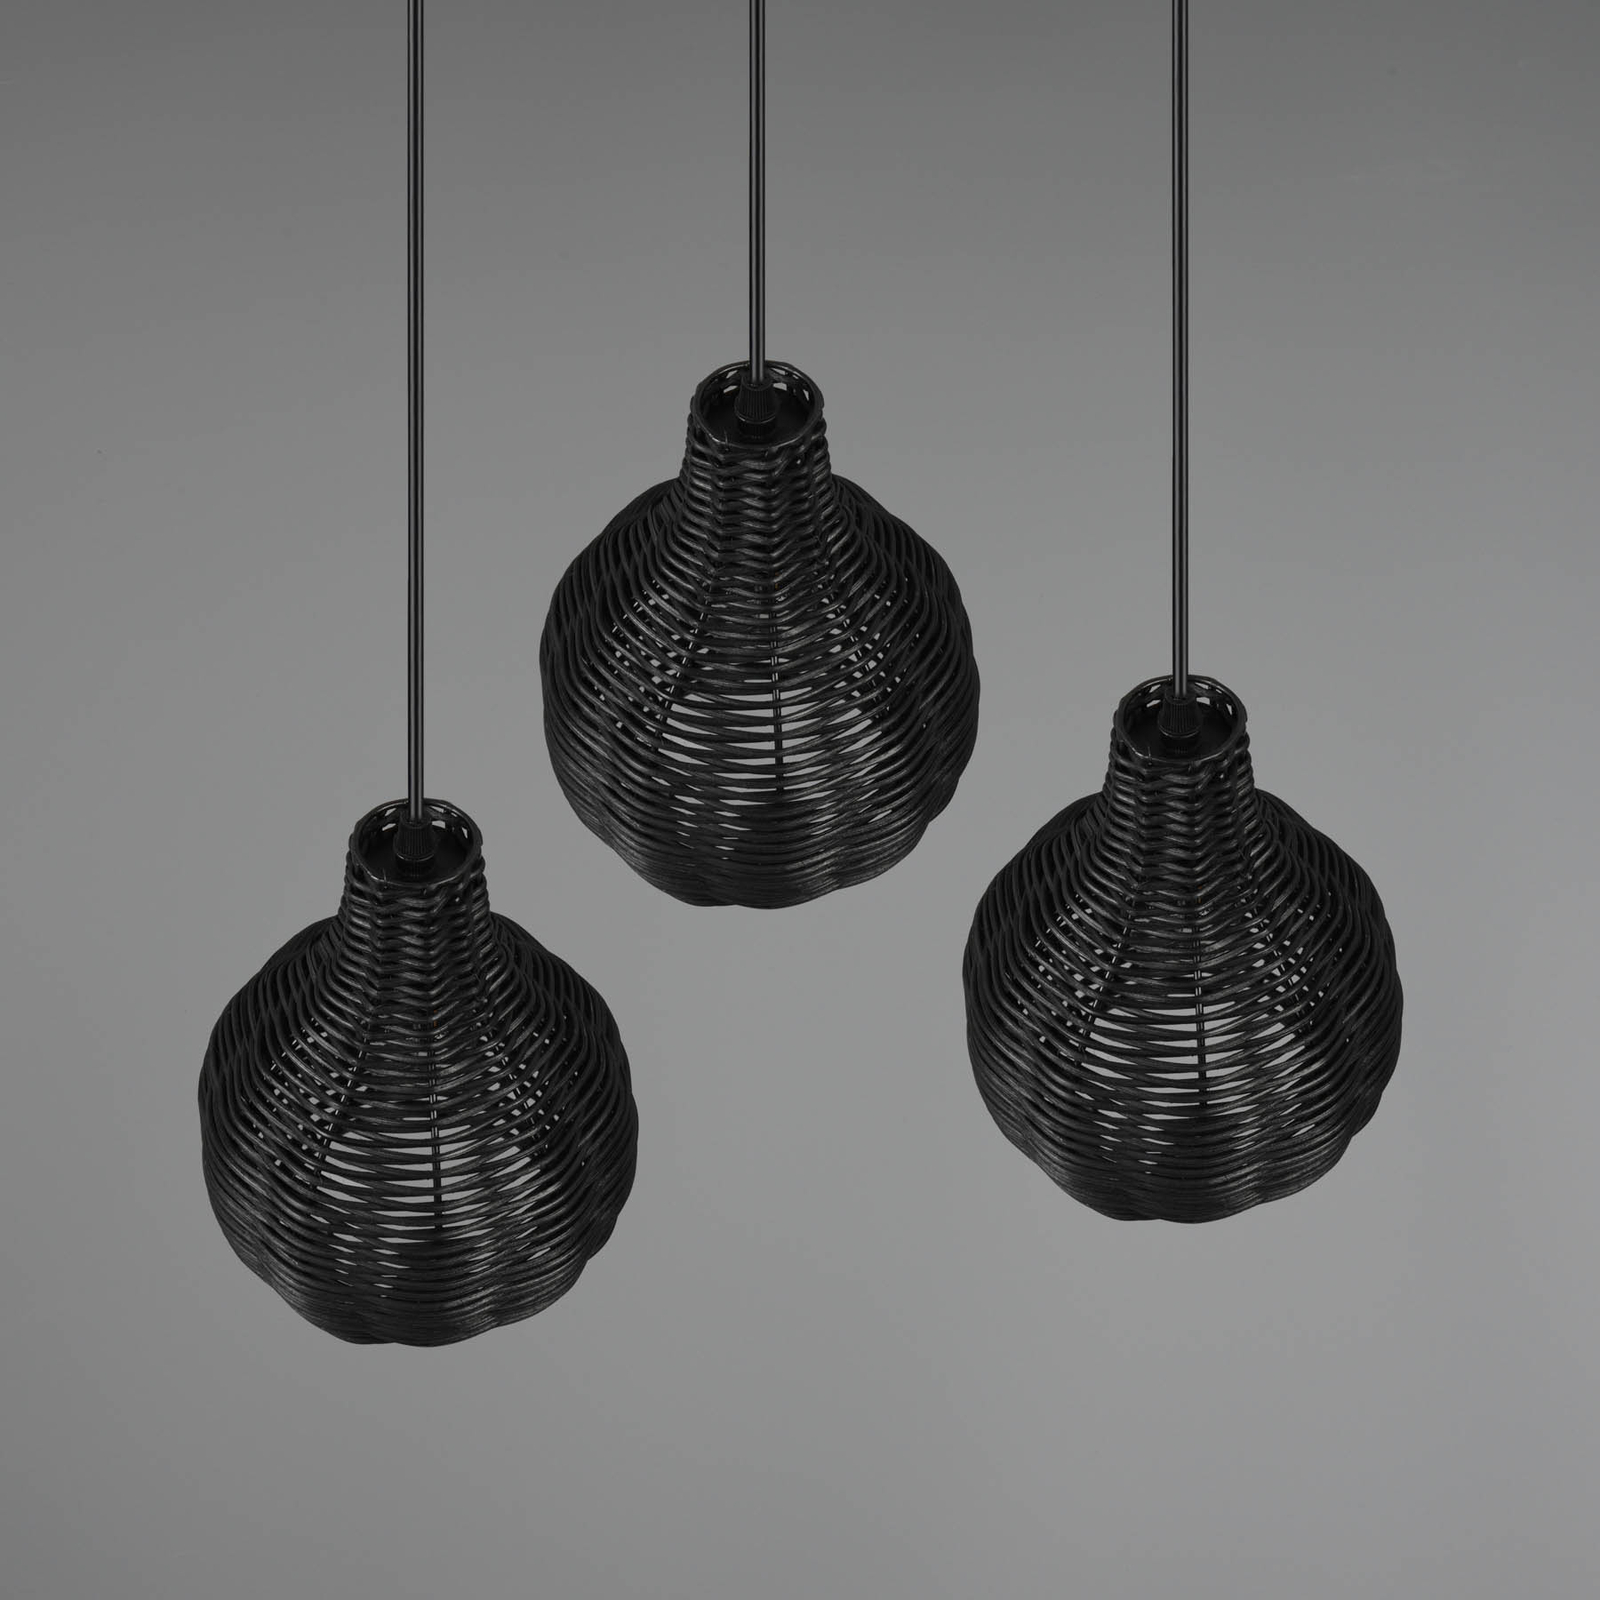 Sprout pendant light made of rattan, 3-bulb, black